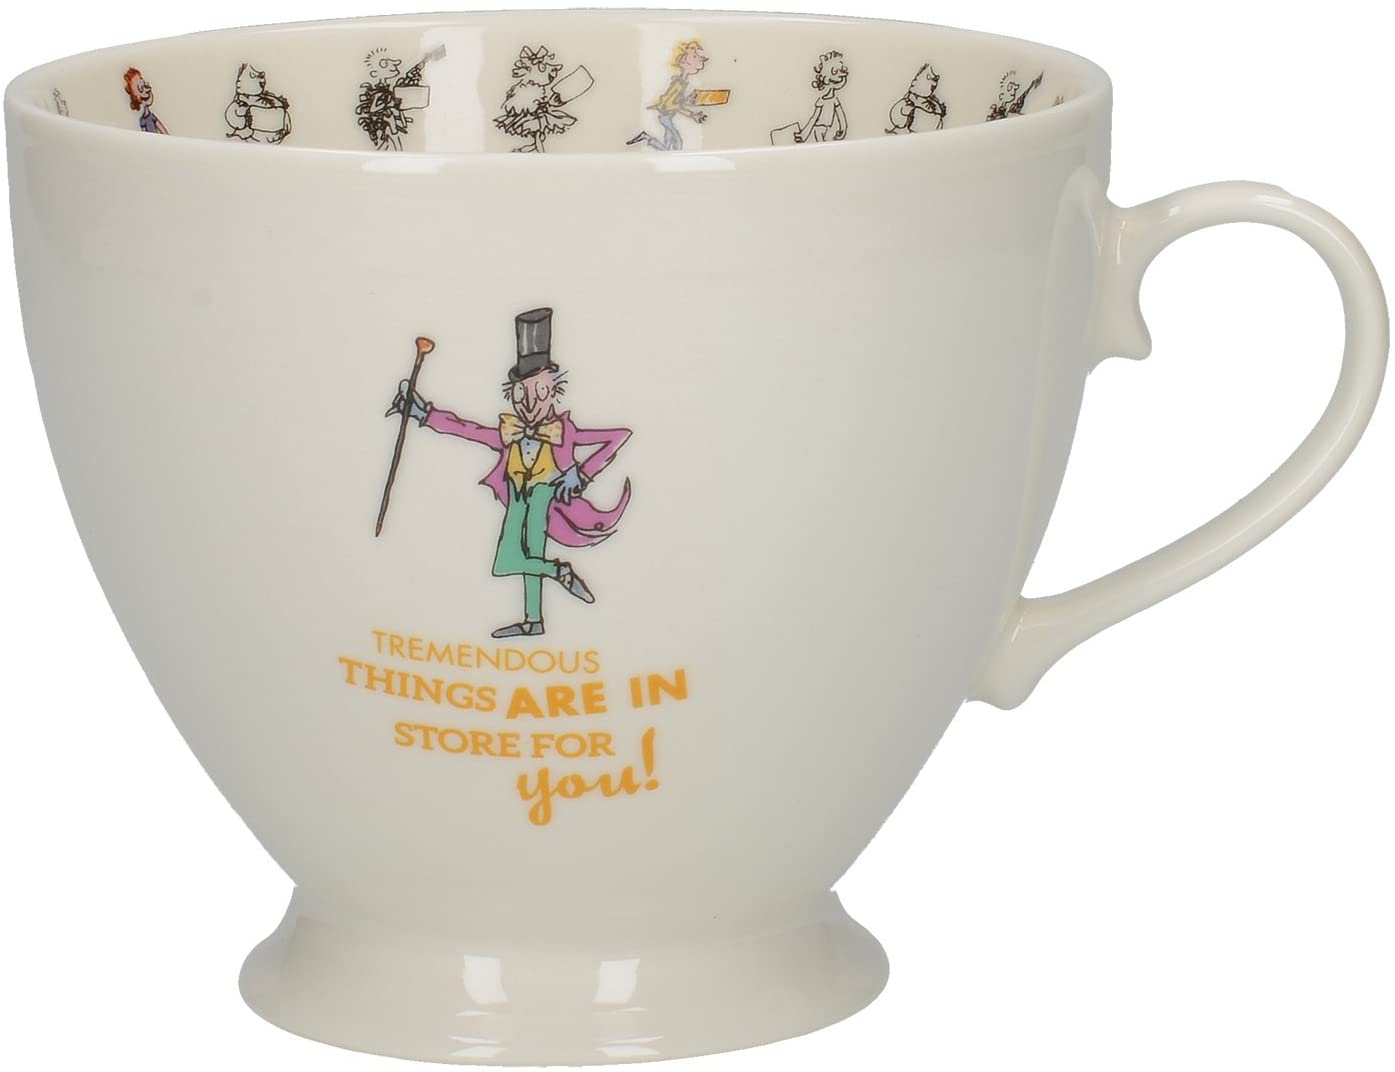 Creative Tops Roald Dahl Porcelain Cup with Base with Quentin Blake Charlie and the Chocolate Factory Illustration, Porcelain, White/Multi-Colour, 13.5 x 10.5 x 8.5 cm